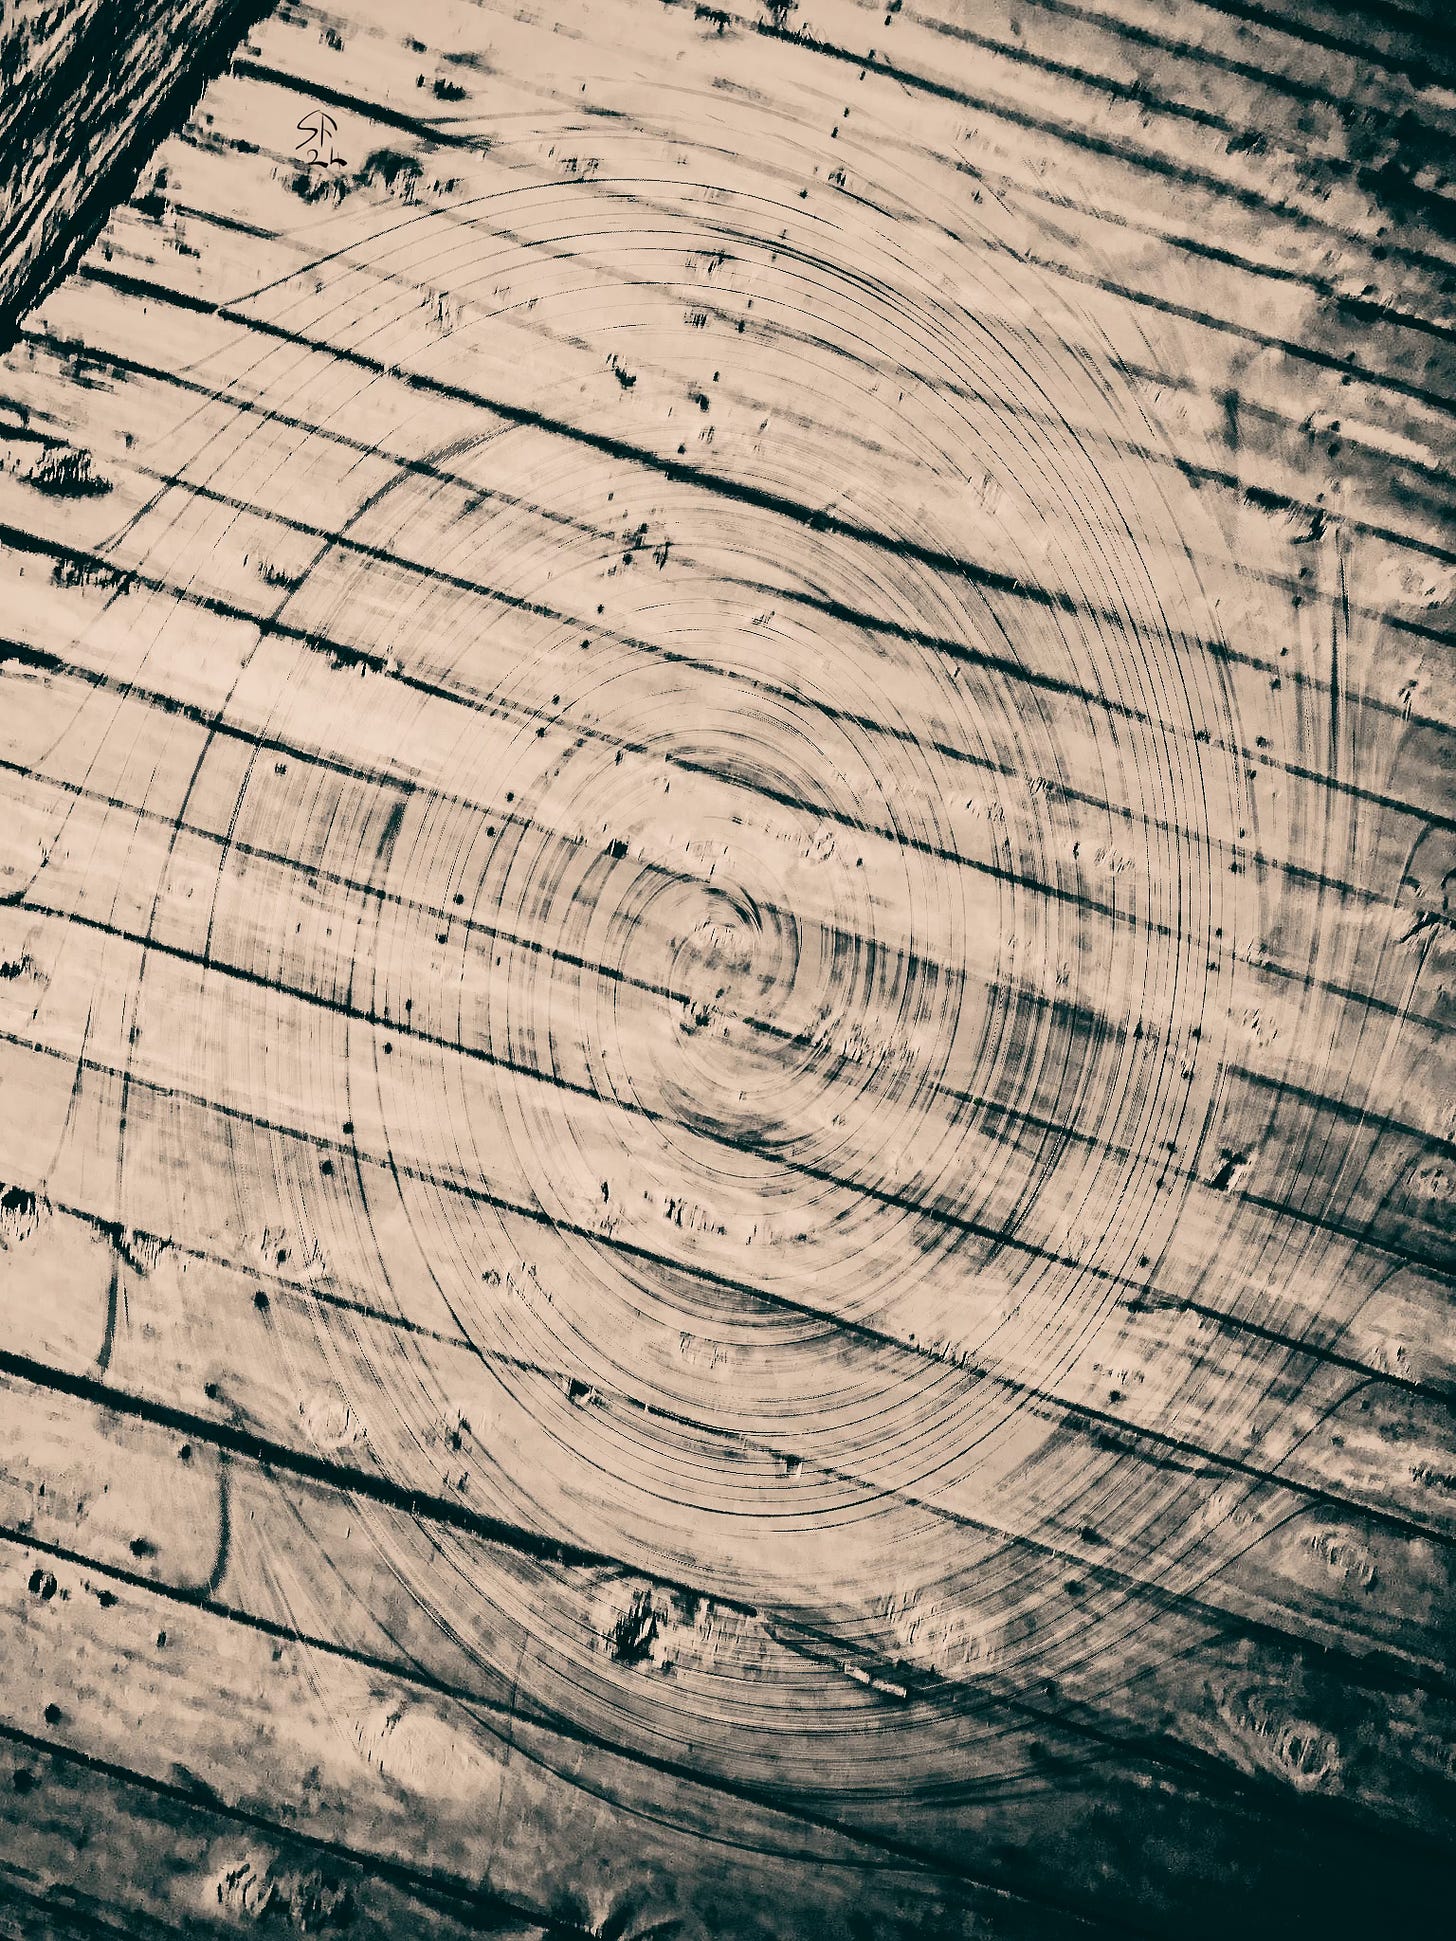 Black-and-white photo of old timber floor, a swirling vortex superimposed